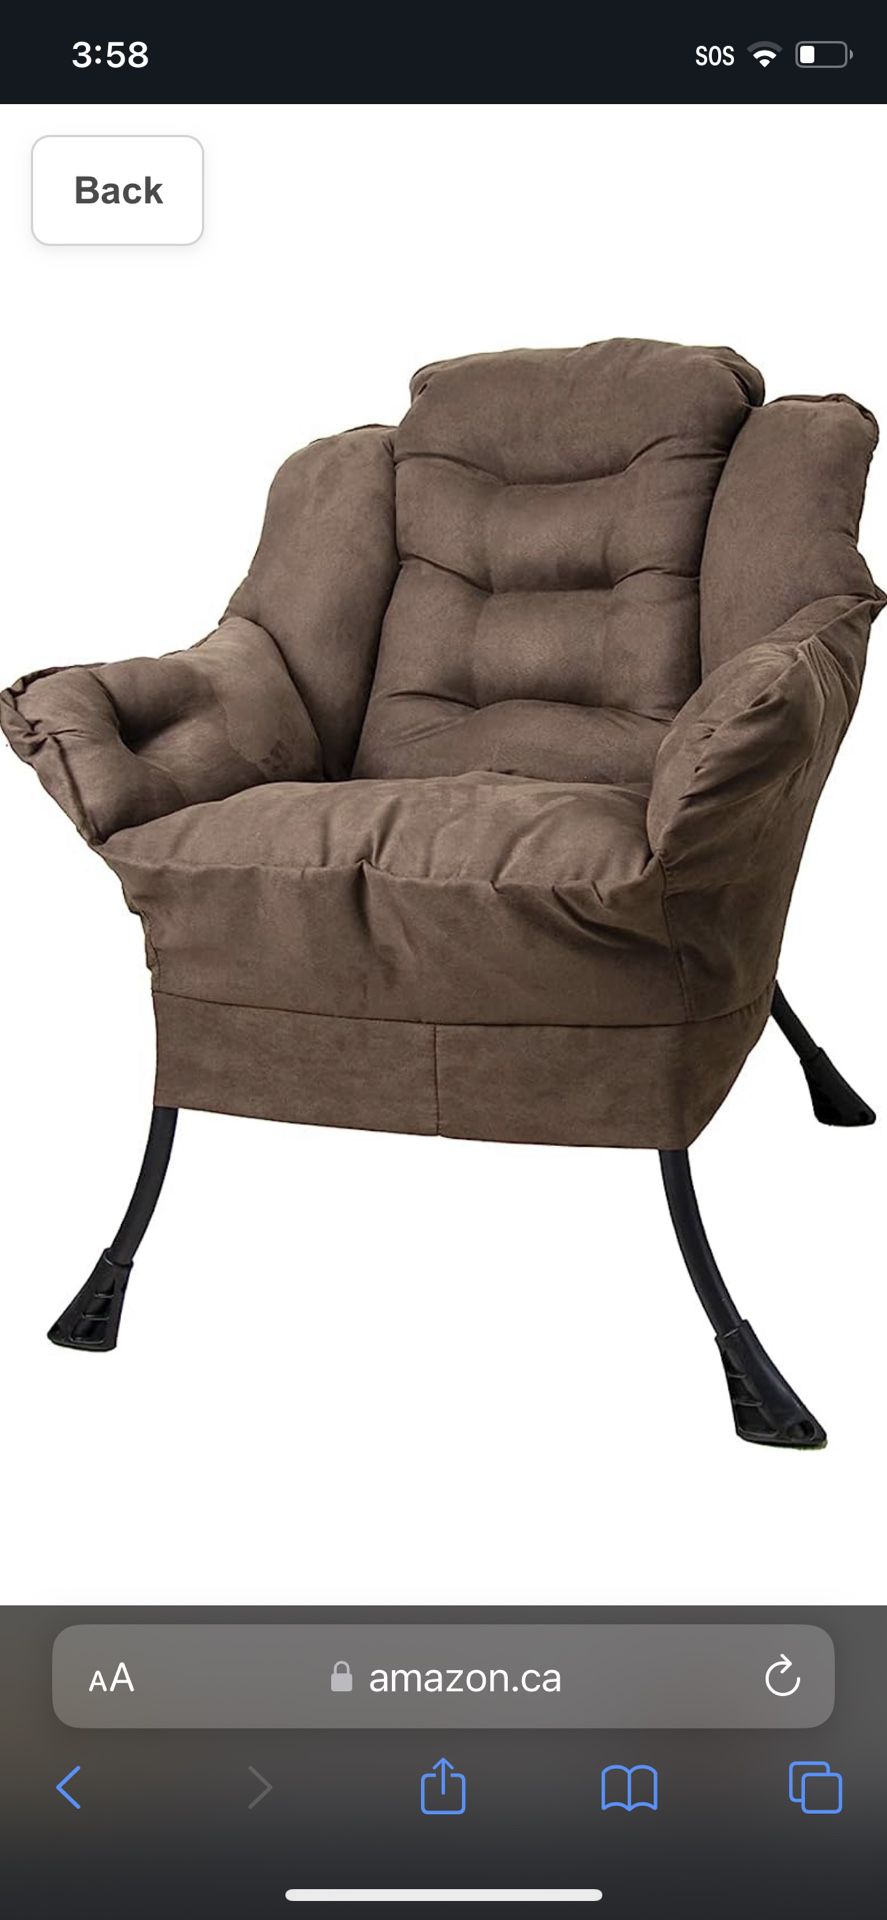 TOYSINTHEBOX Accent Sofa Chair Living Room Chair Single Steel Frame Lazy Chair Reclining Armchair with Thick Padded Back and Two Side Pockets, Brown